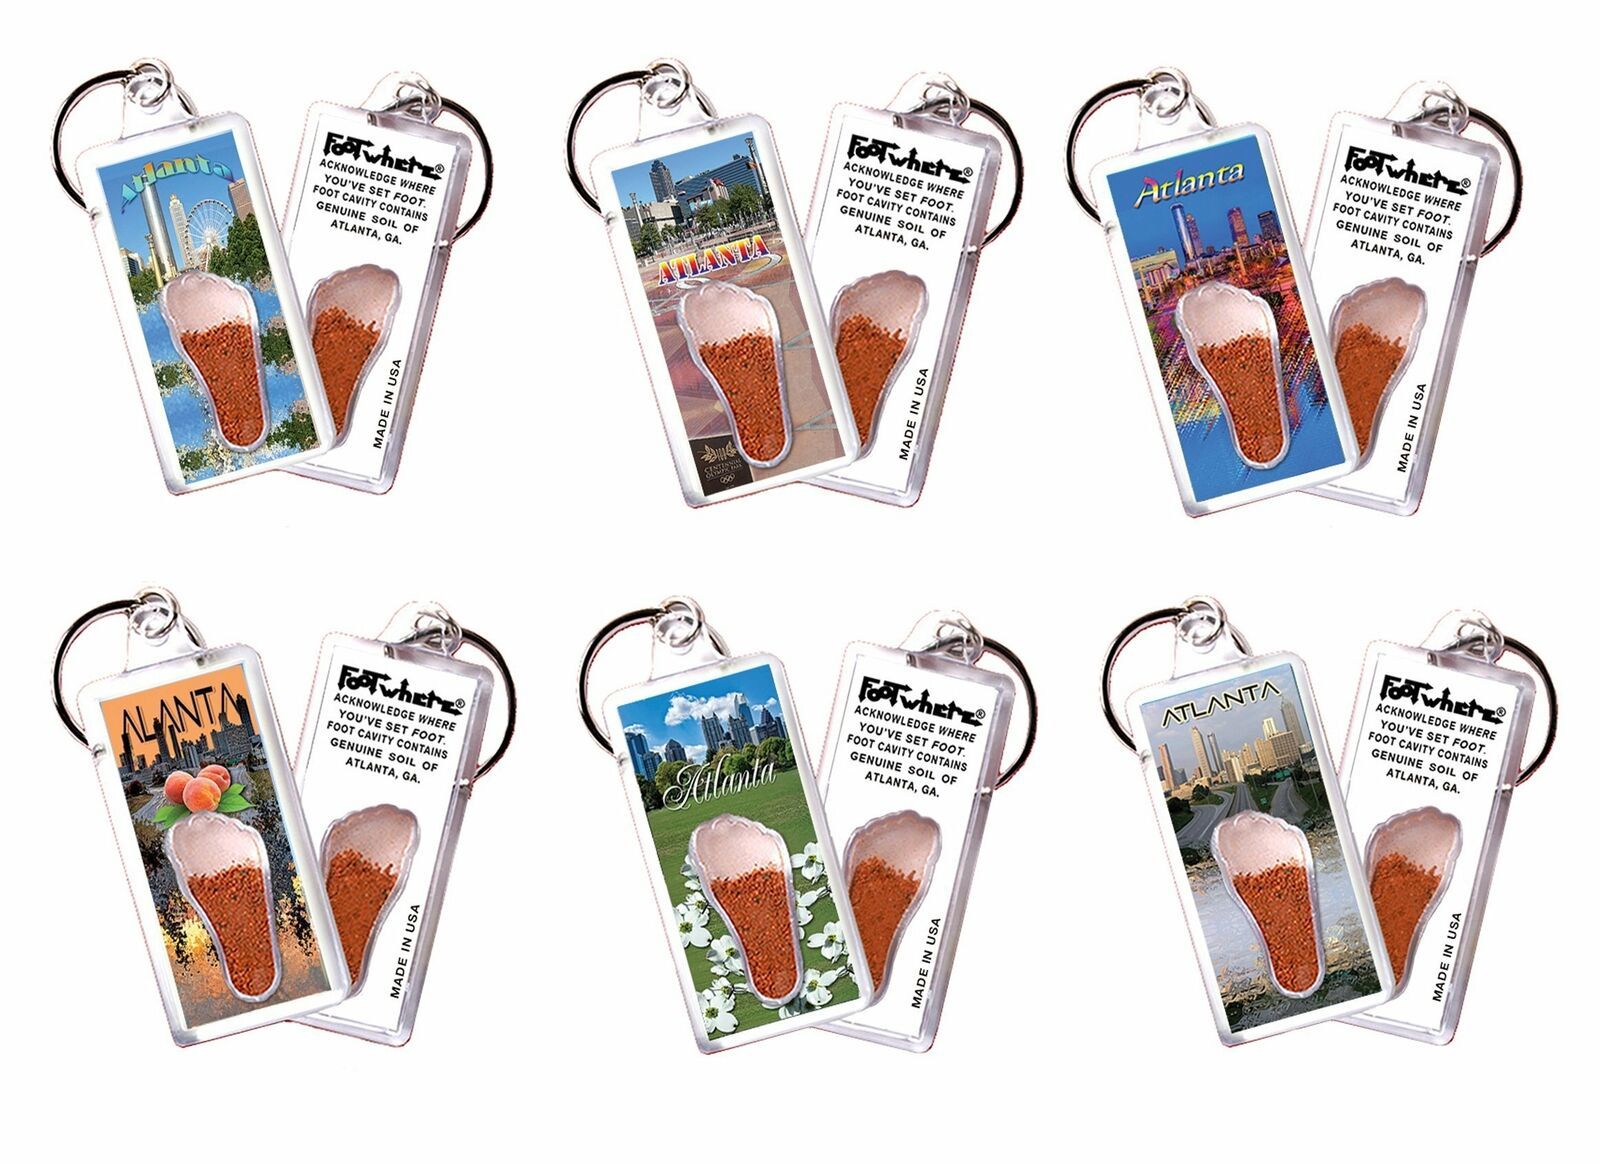 Primary image for Atlanta FootWhere® Souvenir Keychains. 6 Piece Set. Made in USA